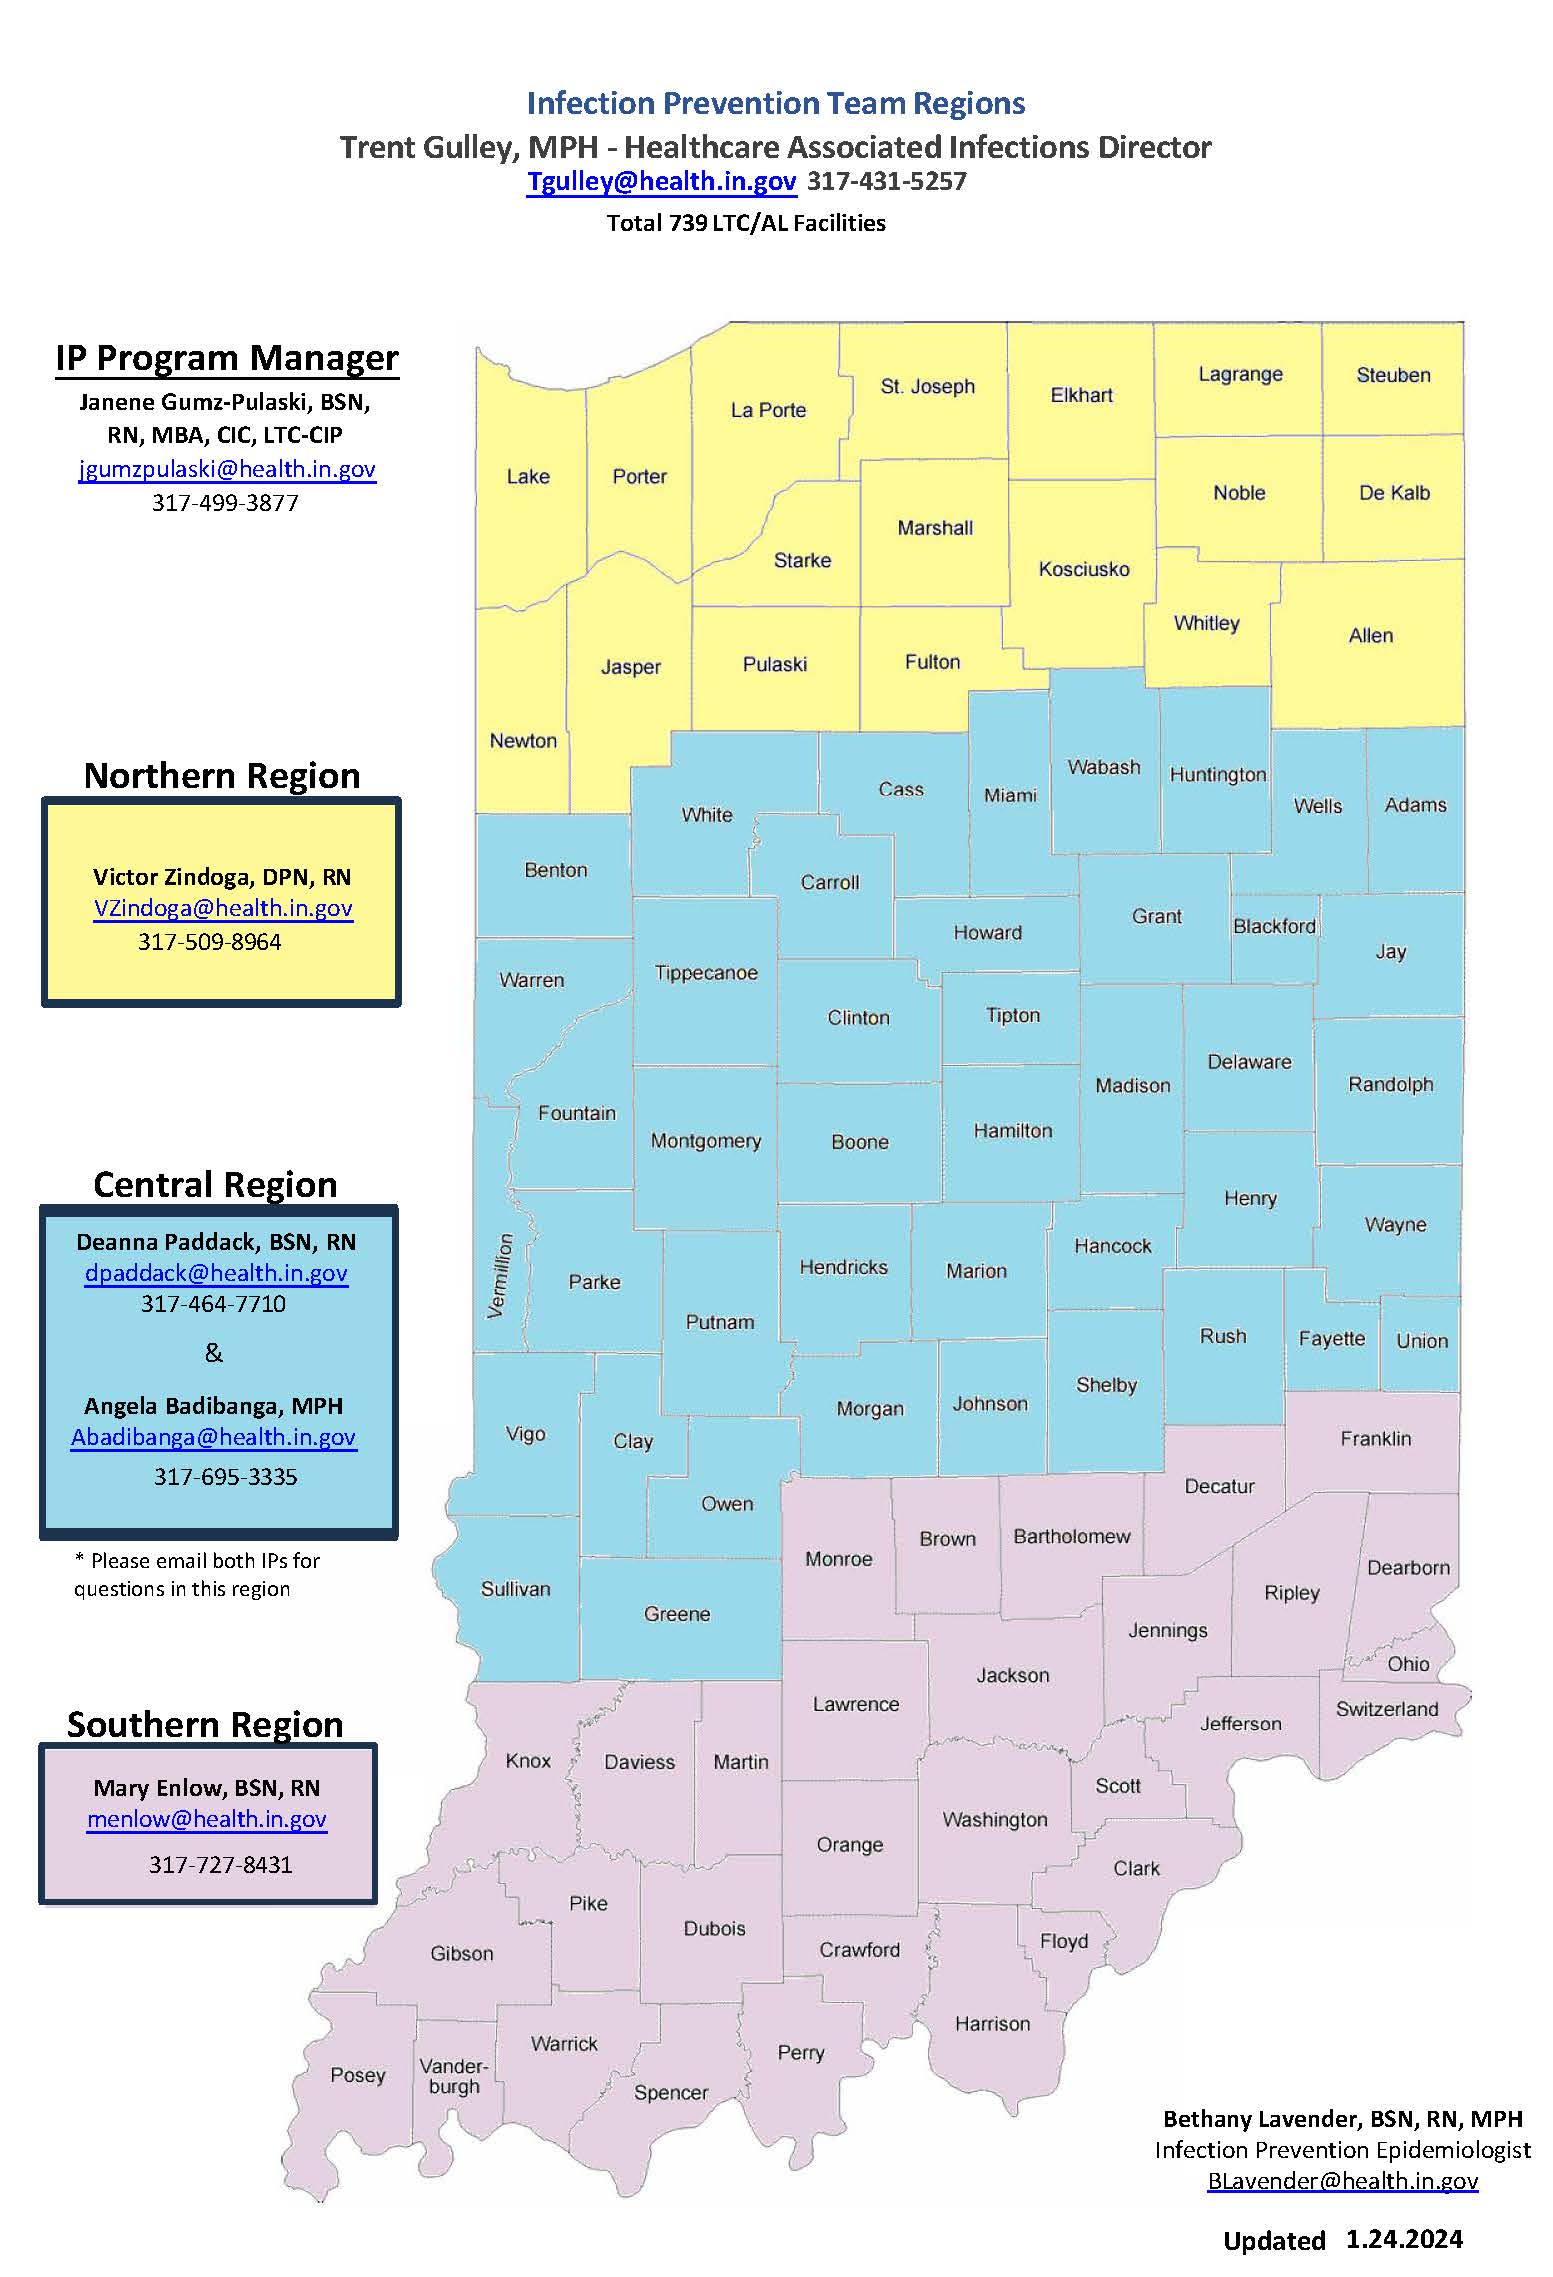 Map of IDOH's infection prevention regions with contacts listed.